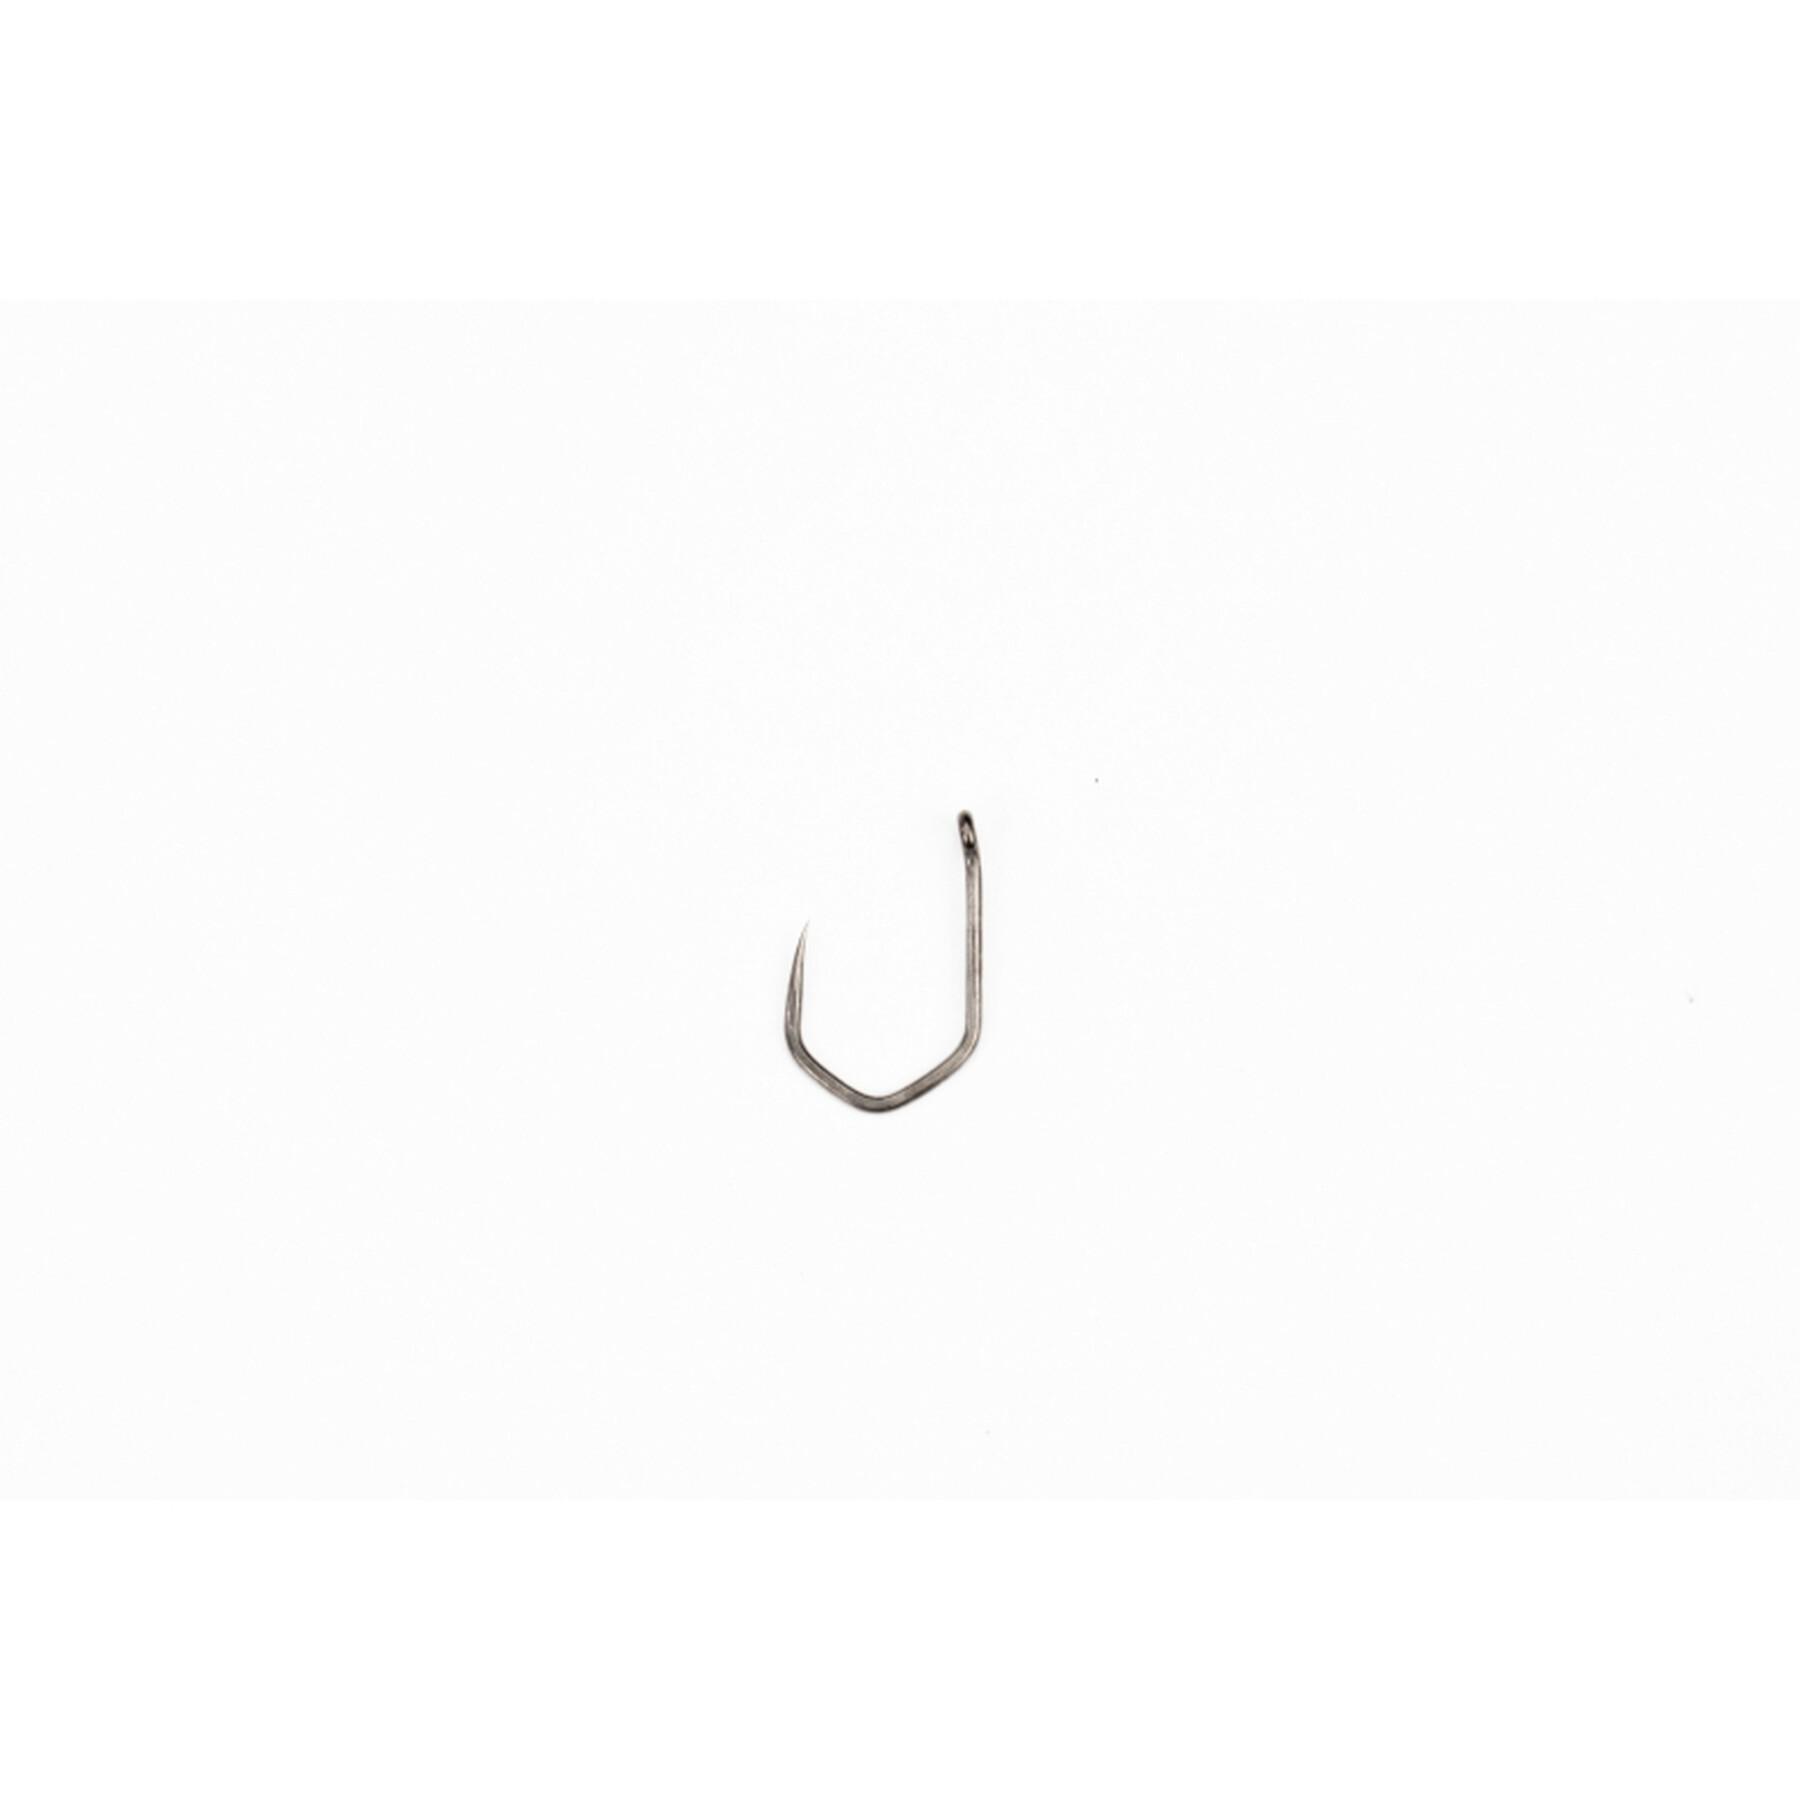 Hook Pinpoint Claw size 4 without swivel